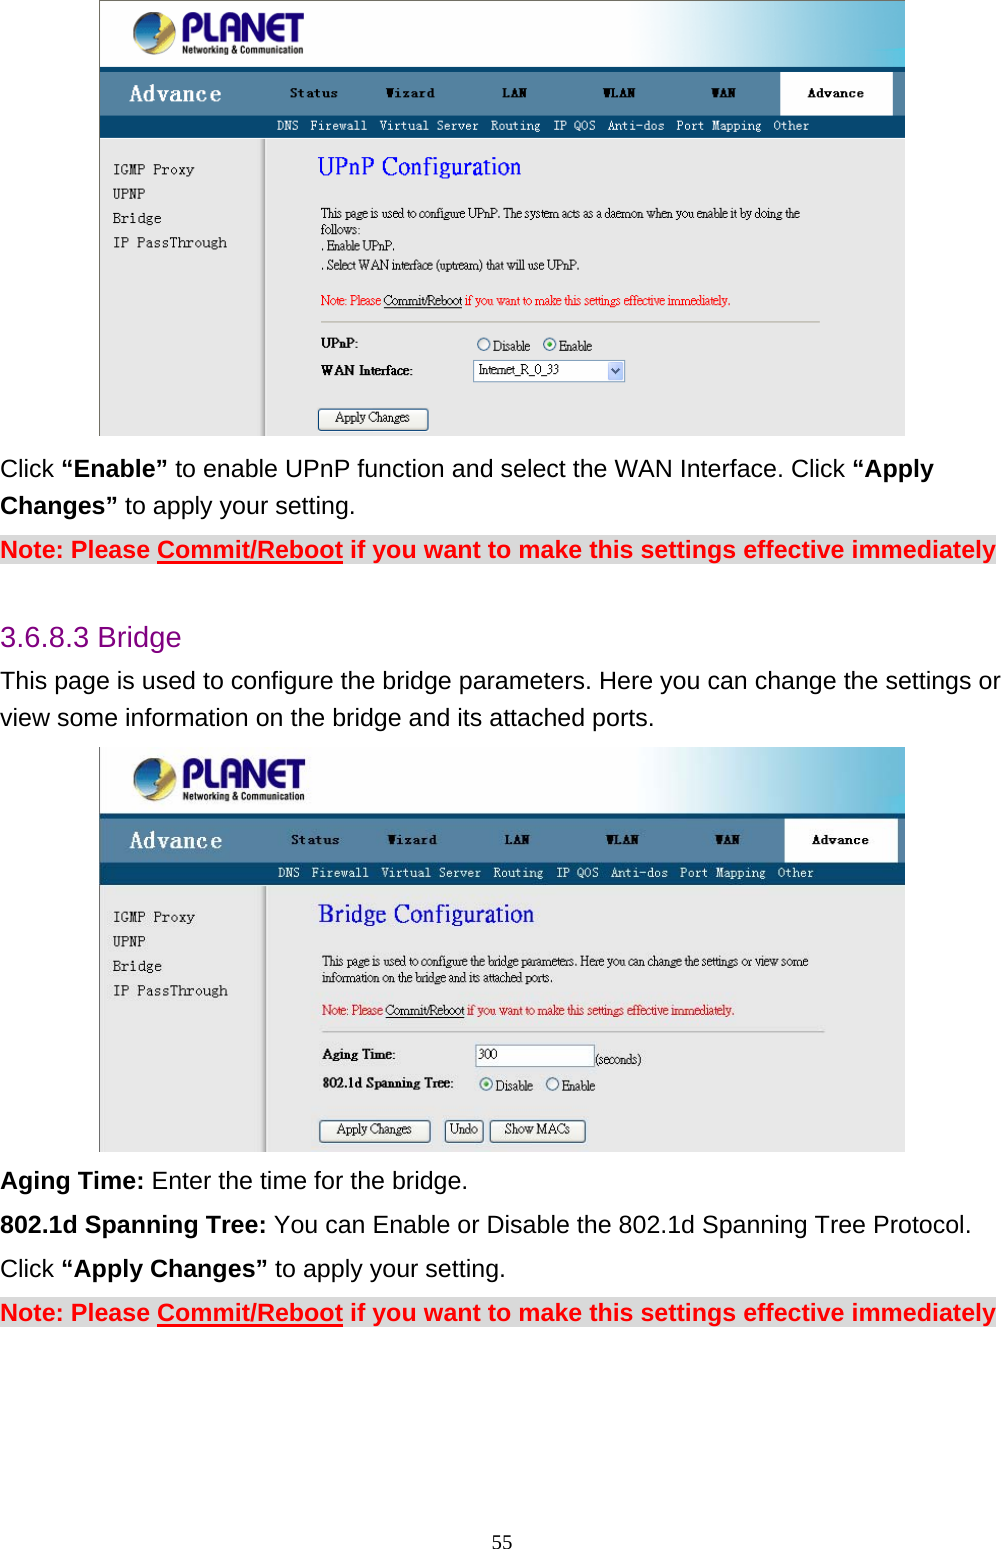  Click “Enable” to enable UPnP function and select the WAN Interface. Click “Apply Changes” to apply your setting. Note: Please Commit/Reboot if you want to make this settings effective immediately  3.6.8.3 Bridge This page is used to configure the bridge parameters. Here you can change the settings or view some information on the bridge and its attached ports.  Aging Time: Enter the time for the bridge. 802.1d Spanning Tree: You can Enable or Disable the 802.1d Spanning Tree Protocol. Click “Apply Changes” to apply your setting. Note: Please Commit/Reboot if you want to make this settings effective immediately                                                               55